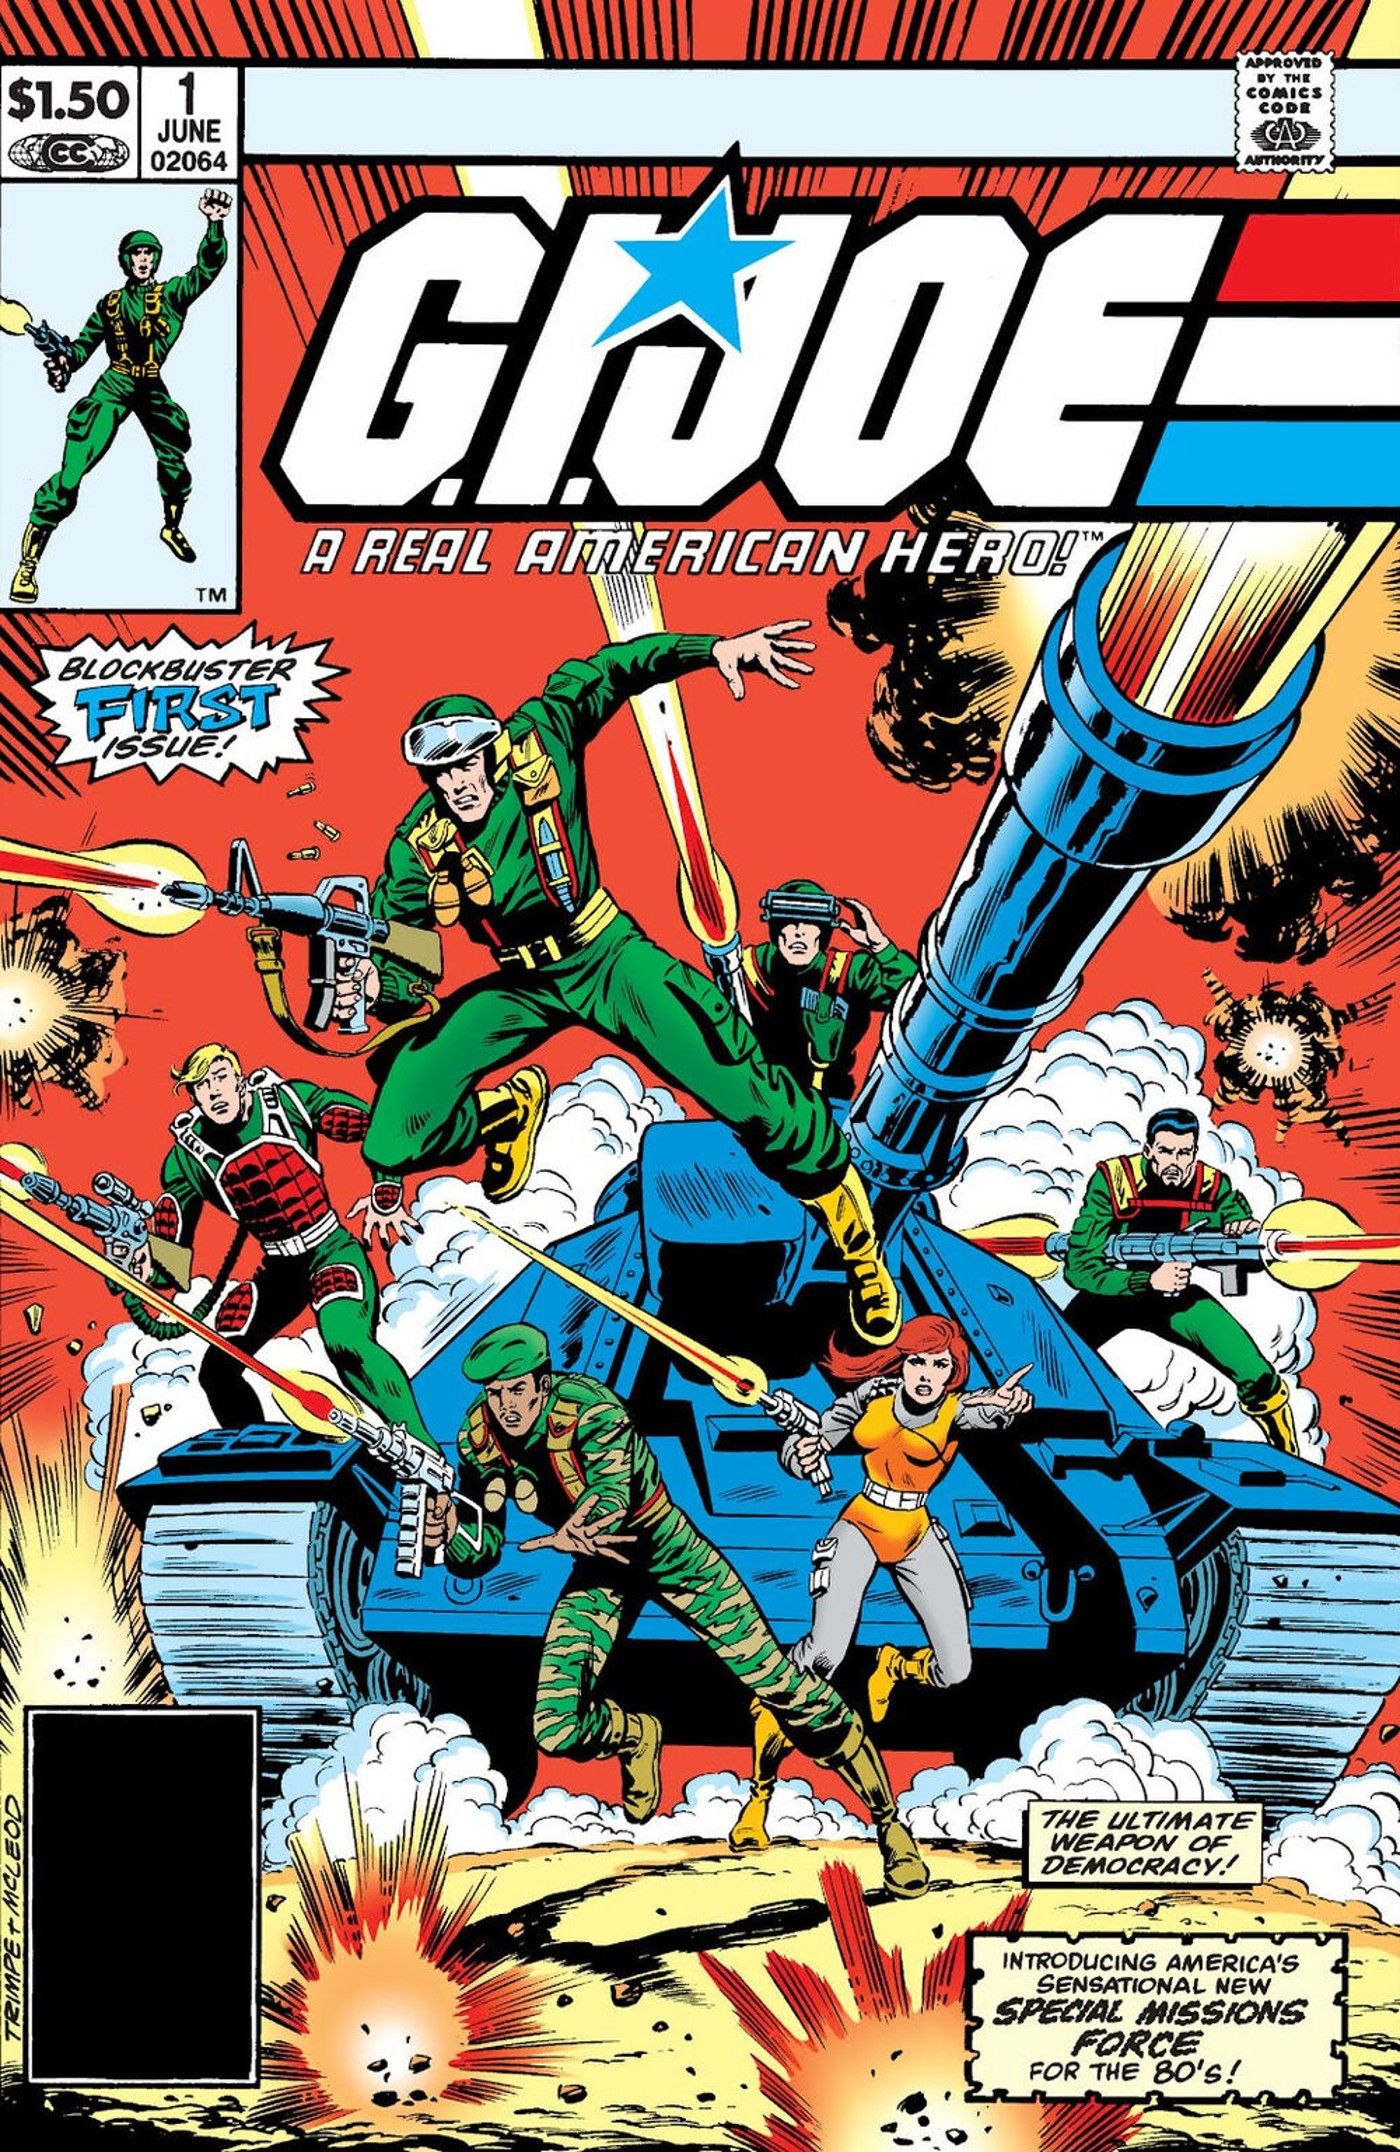 G.I. Joe #1 Re-Release Shares Unedited Dialogue for the First Time